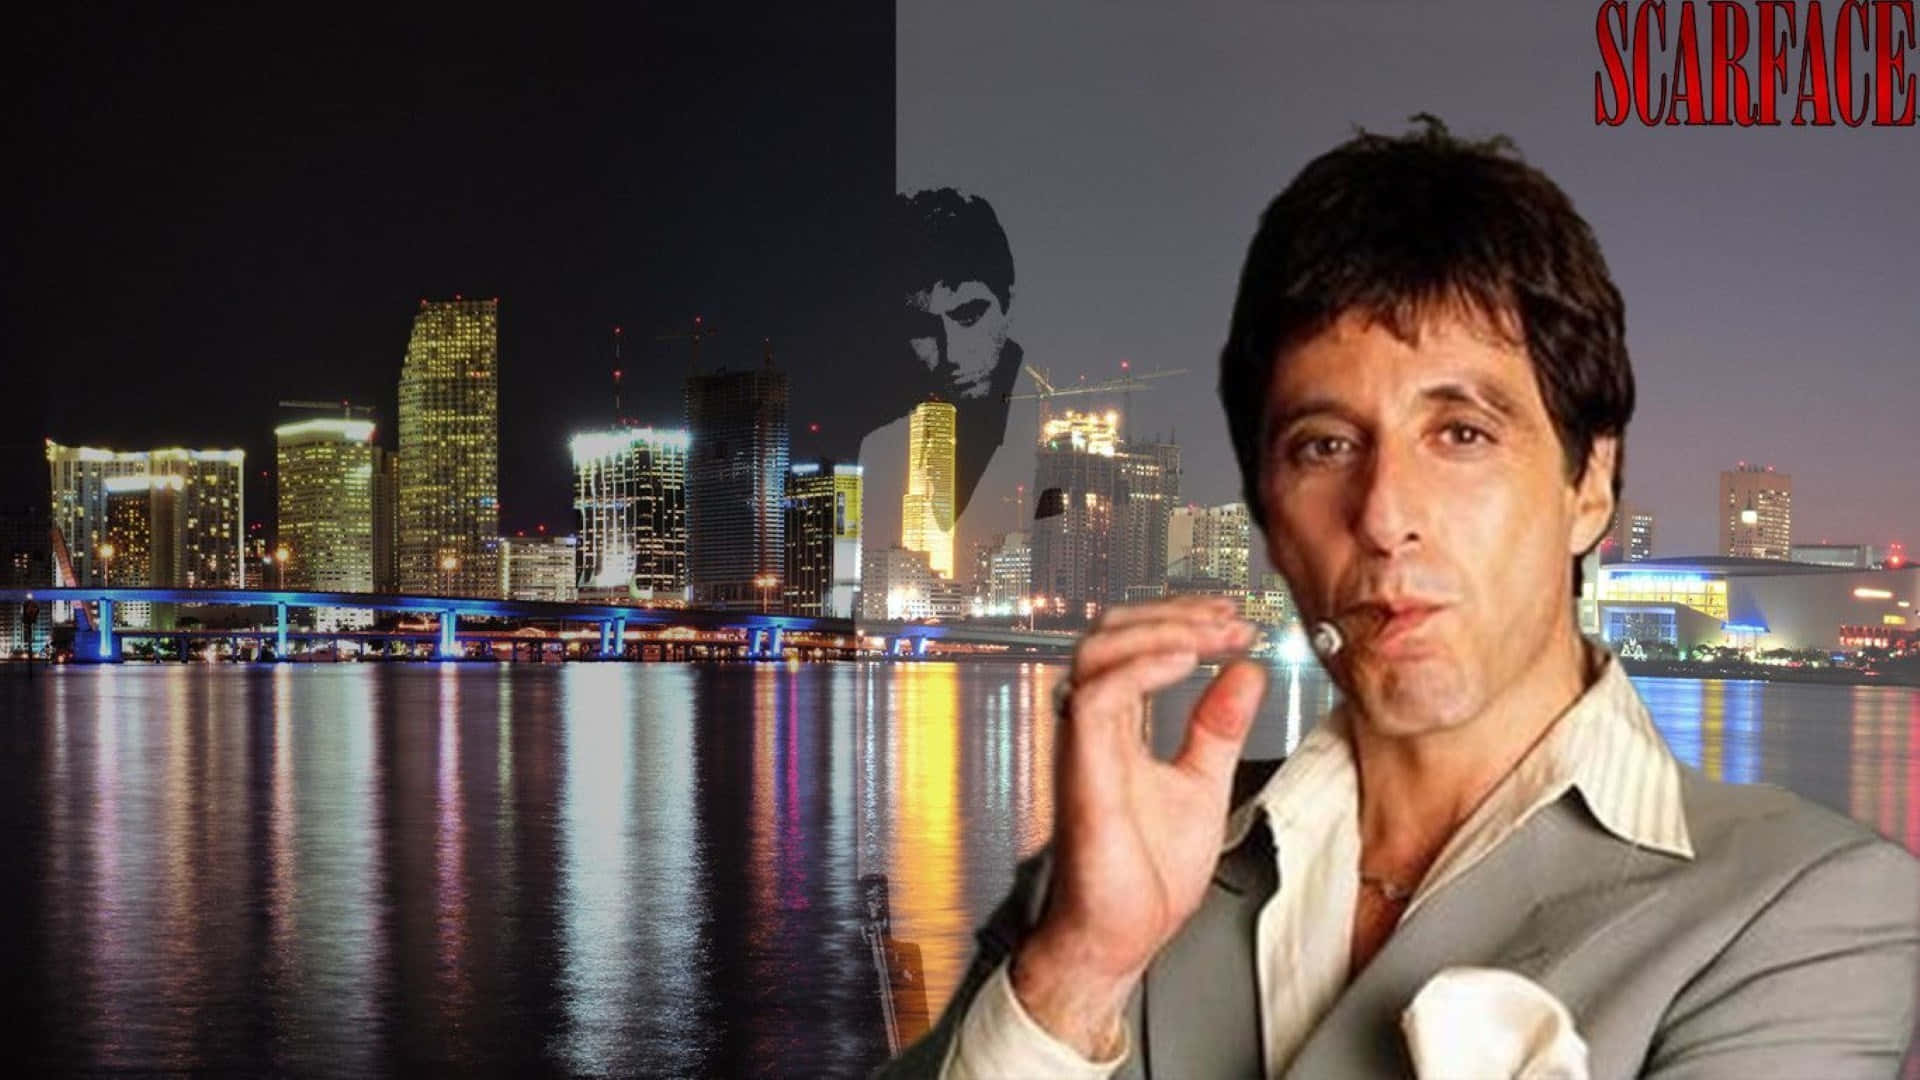 Iconic Scarface portrait displaying Tony Montana in a powerful pose.